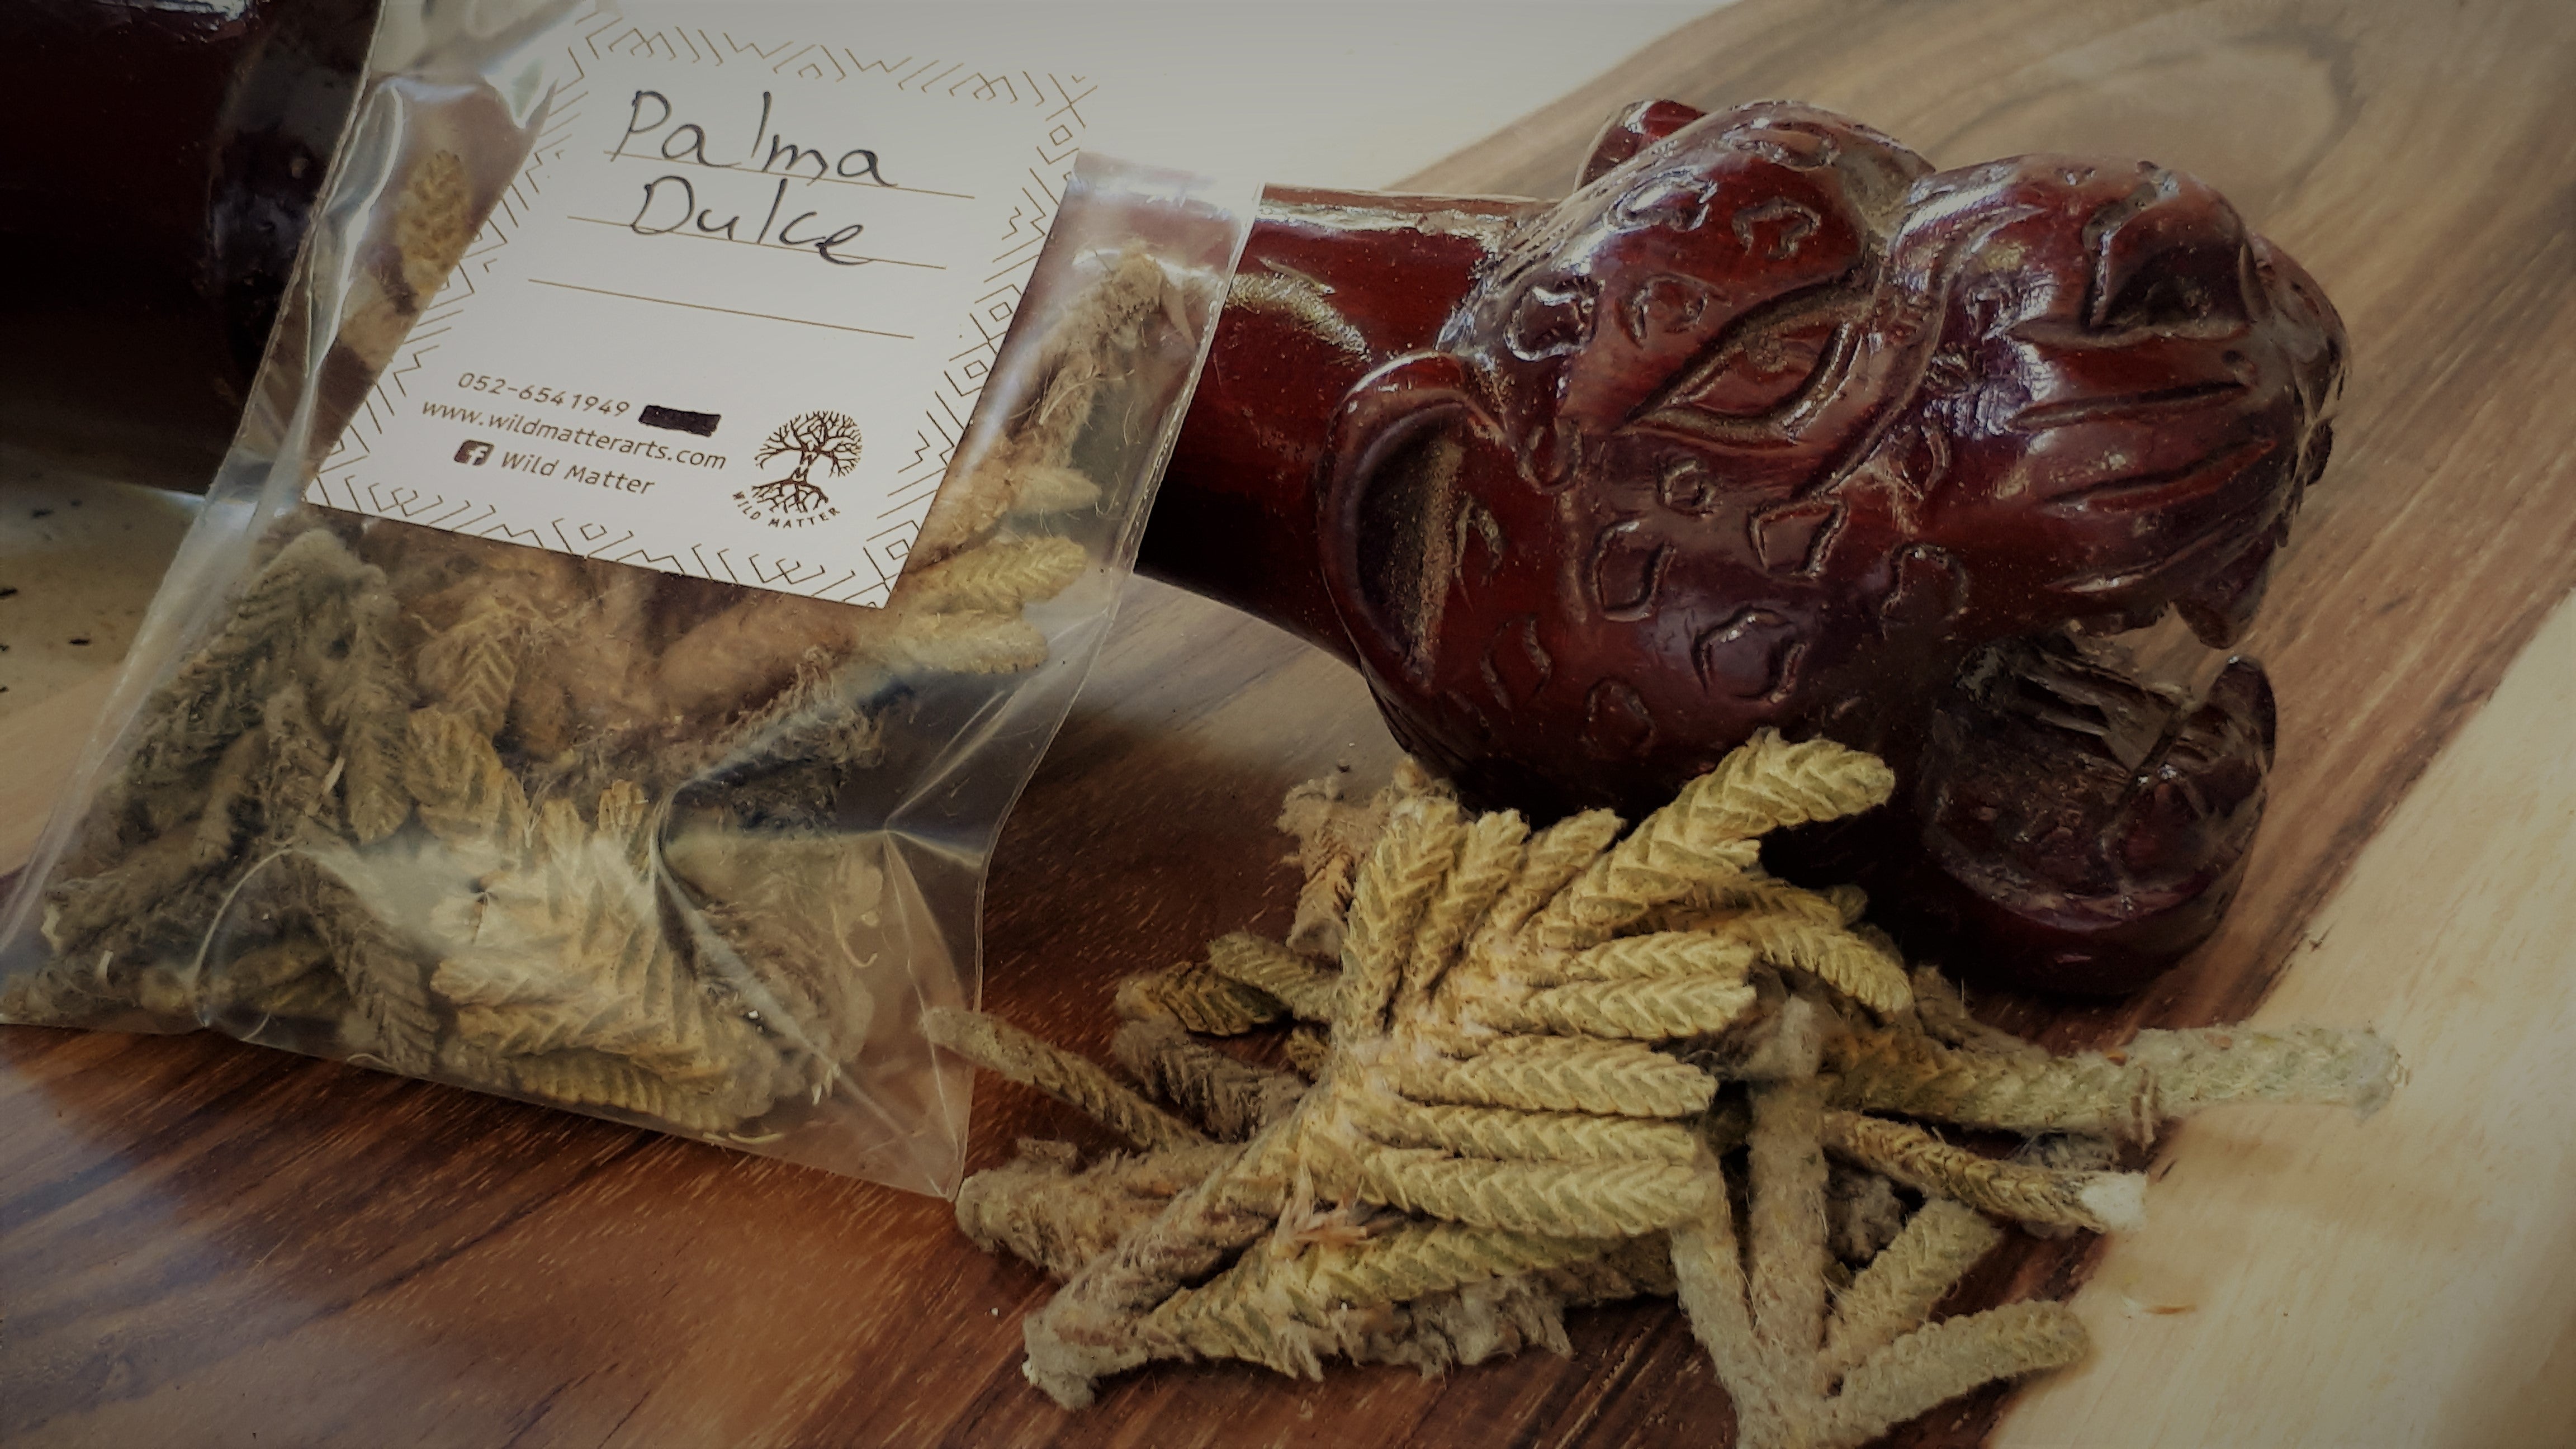 Palma Dulce - Natural Incense from The Peruvian Andes - Wild Matter Arts